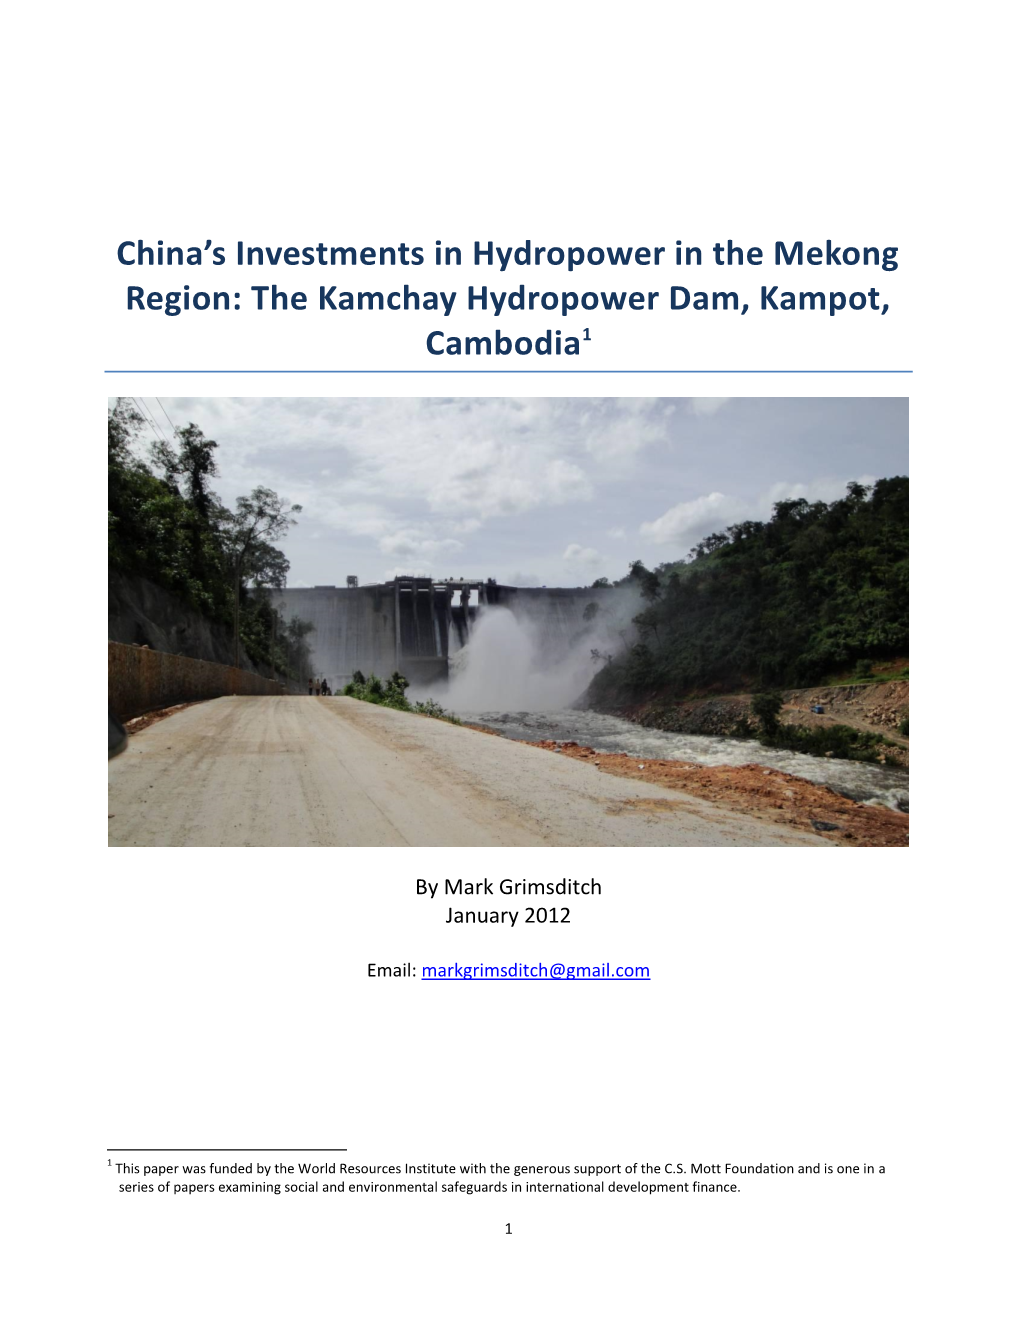 China's Investments in Hydropower in the Mekong Region